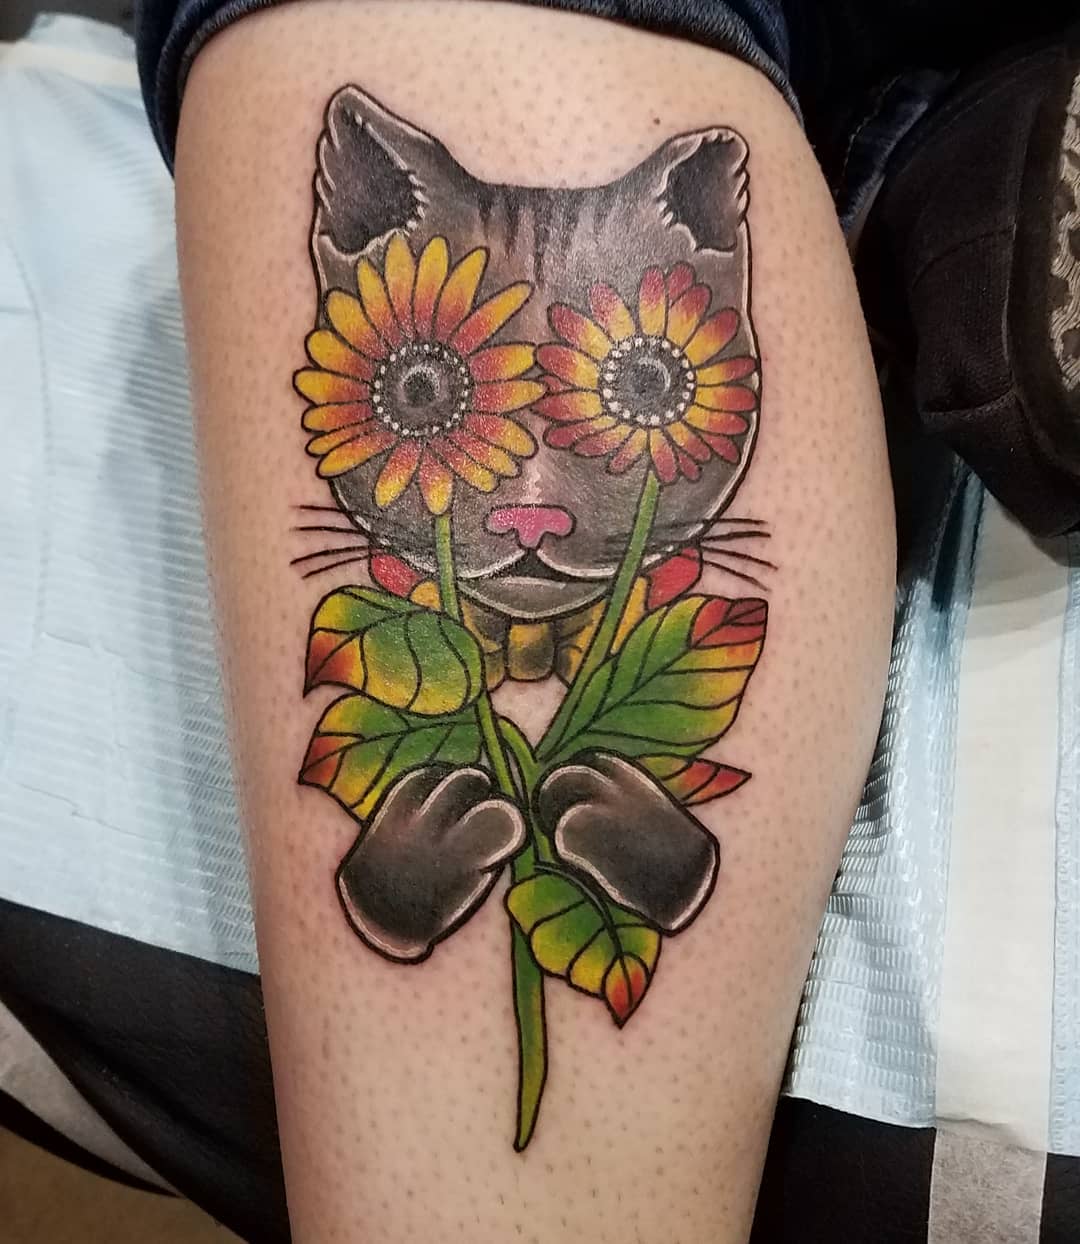 Wild Cat Tattoo With Sunflower As Eyes